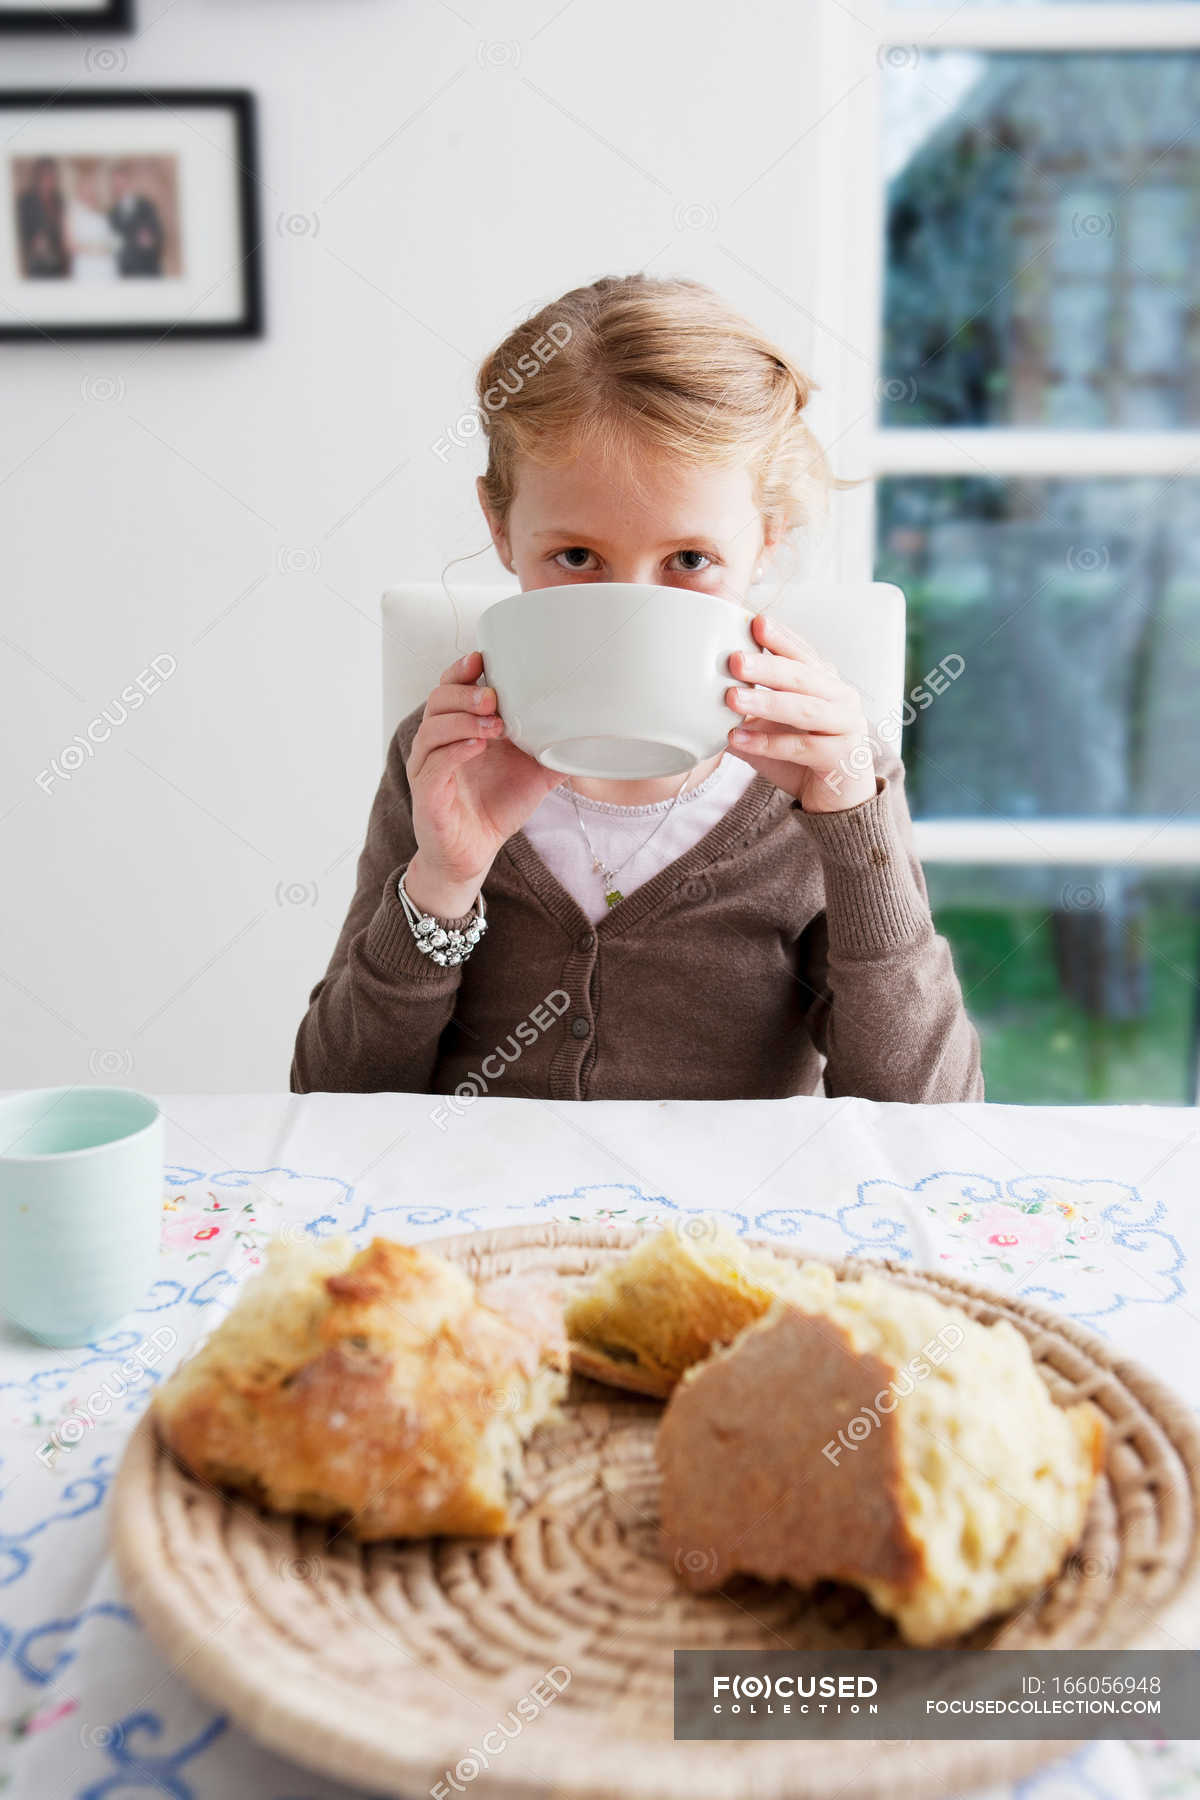 Focused 166056948 Stock Photo Girl Drinking Soup Bowl Table 